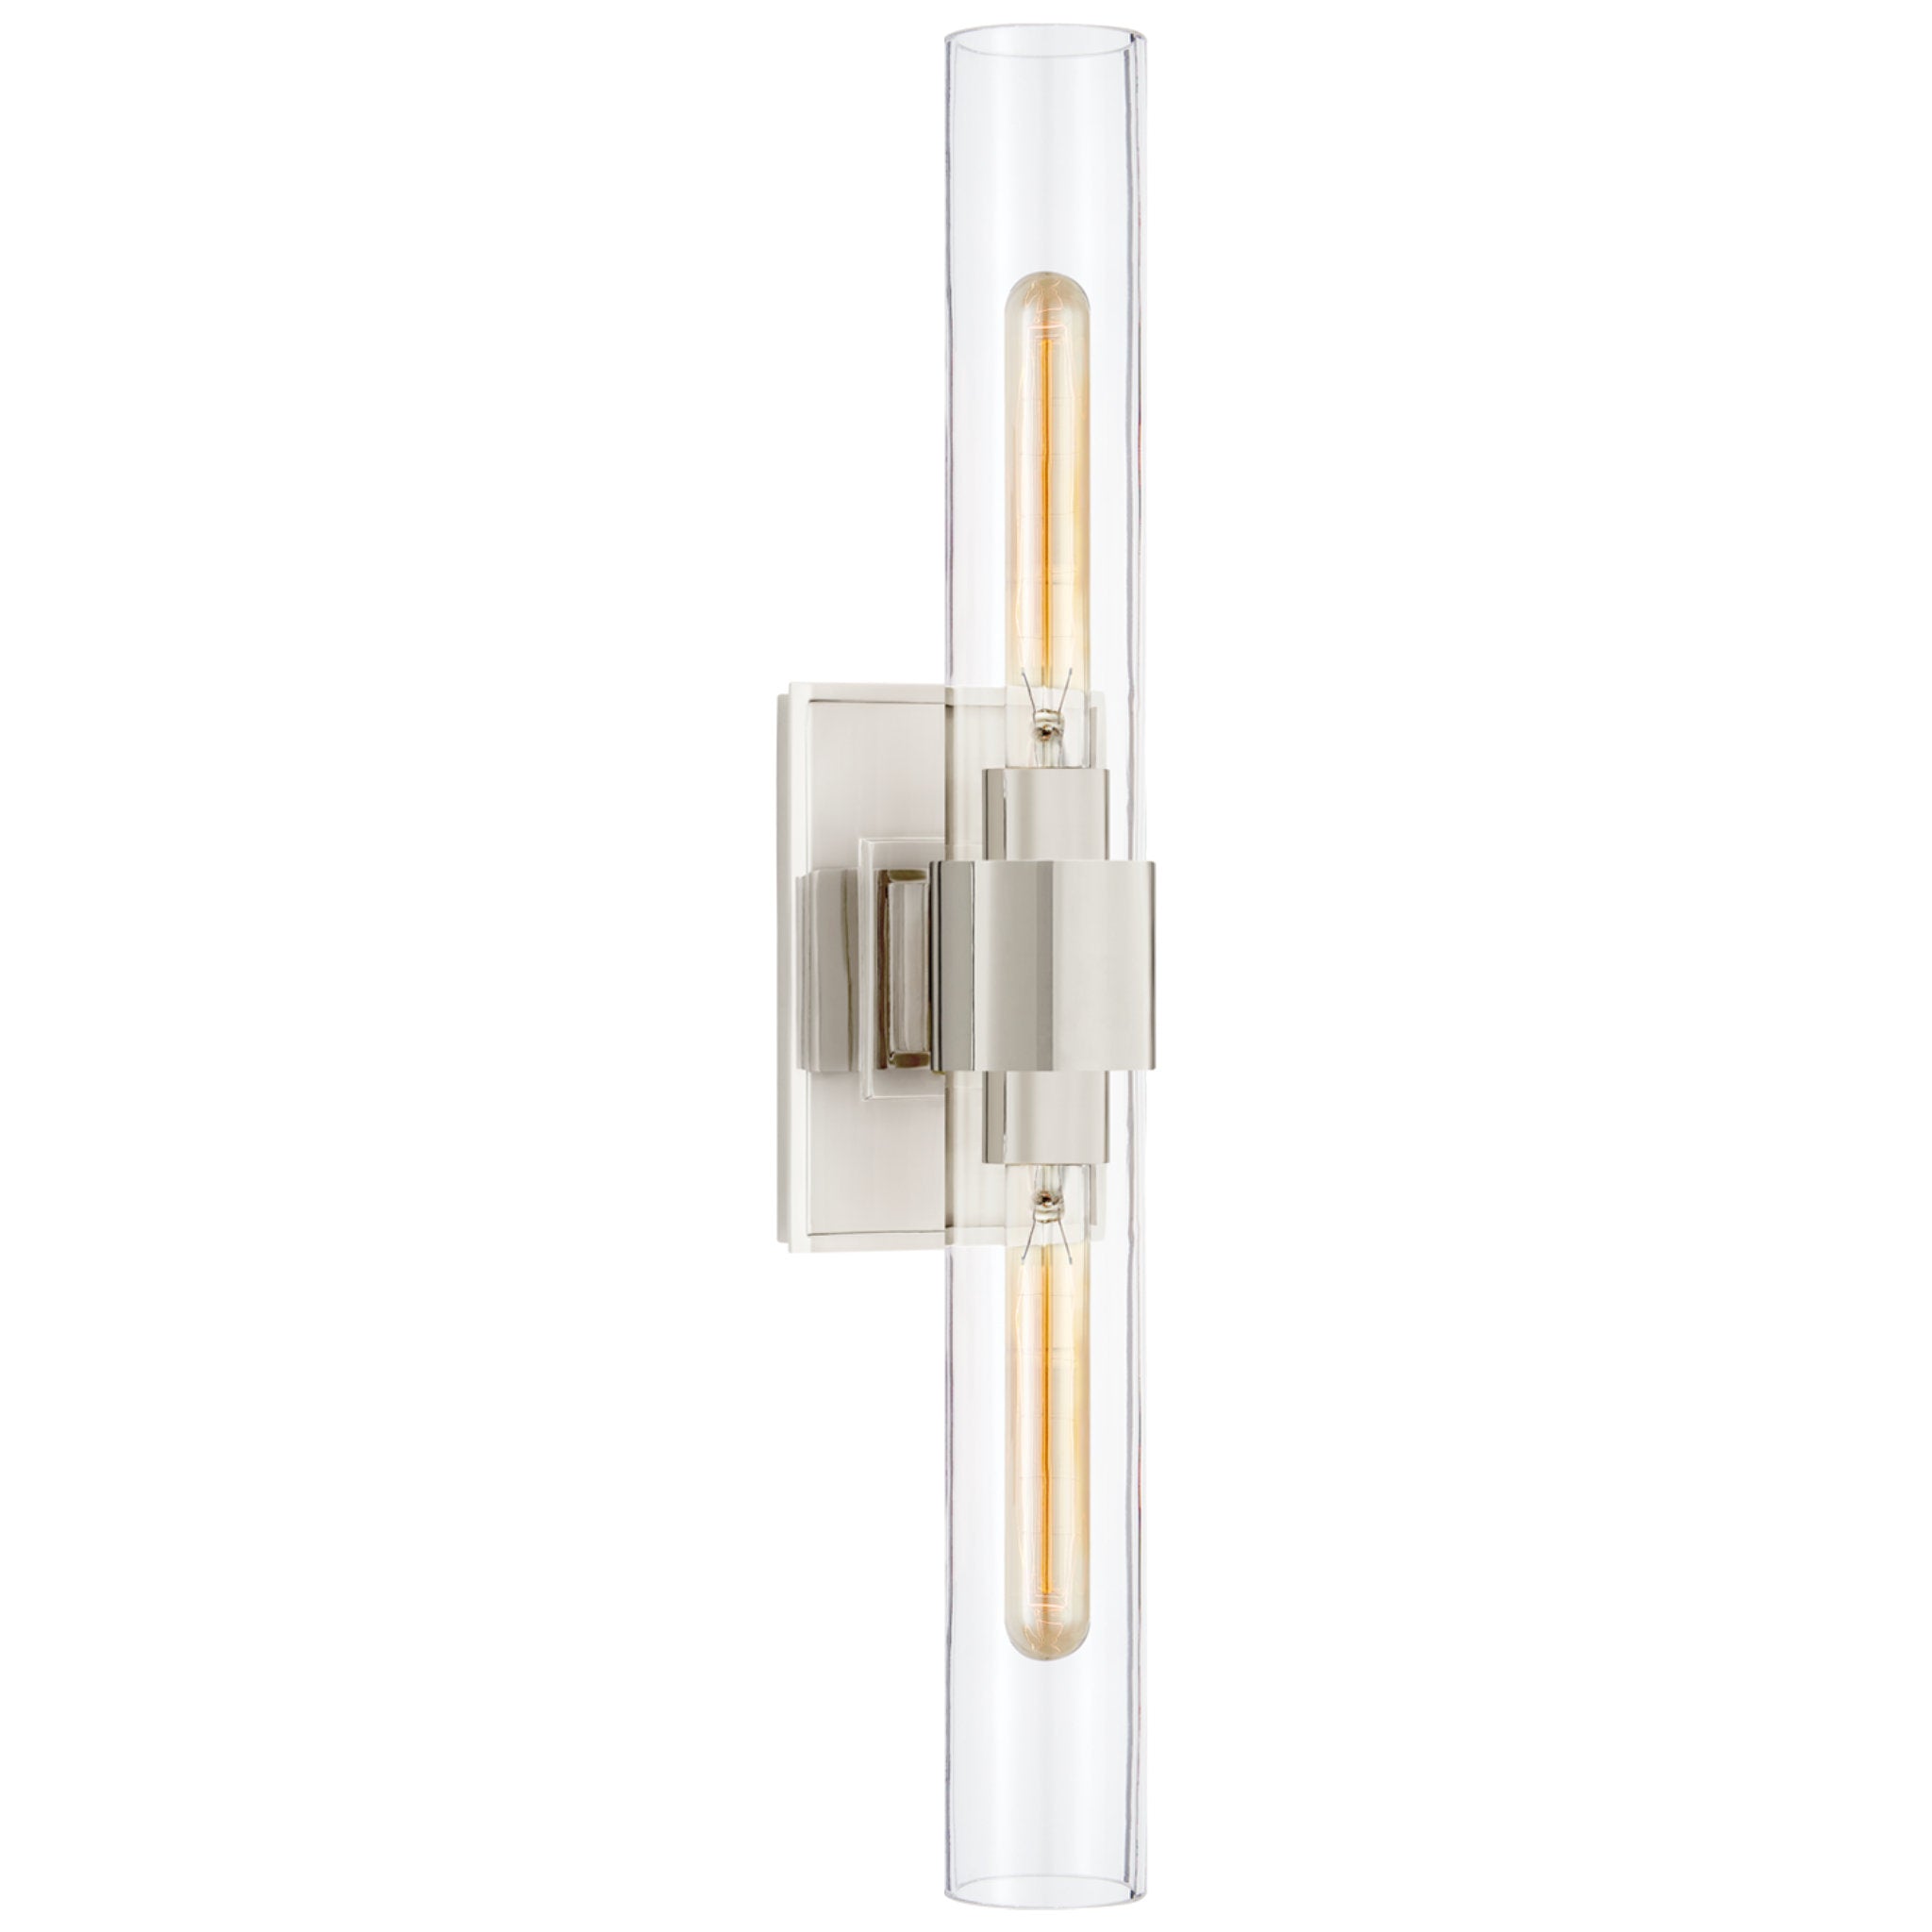 Ian K. Fowler Presidio Petite Double Sconce in Polished Nickel with Clear Glass